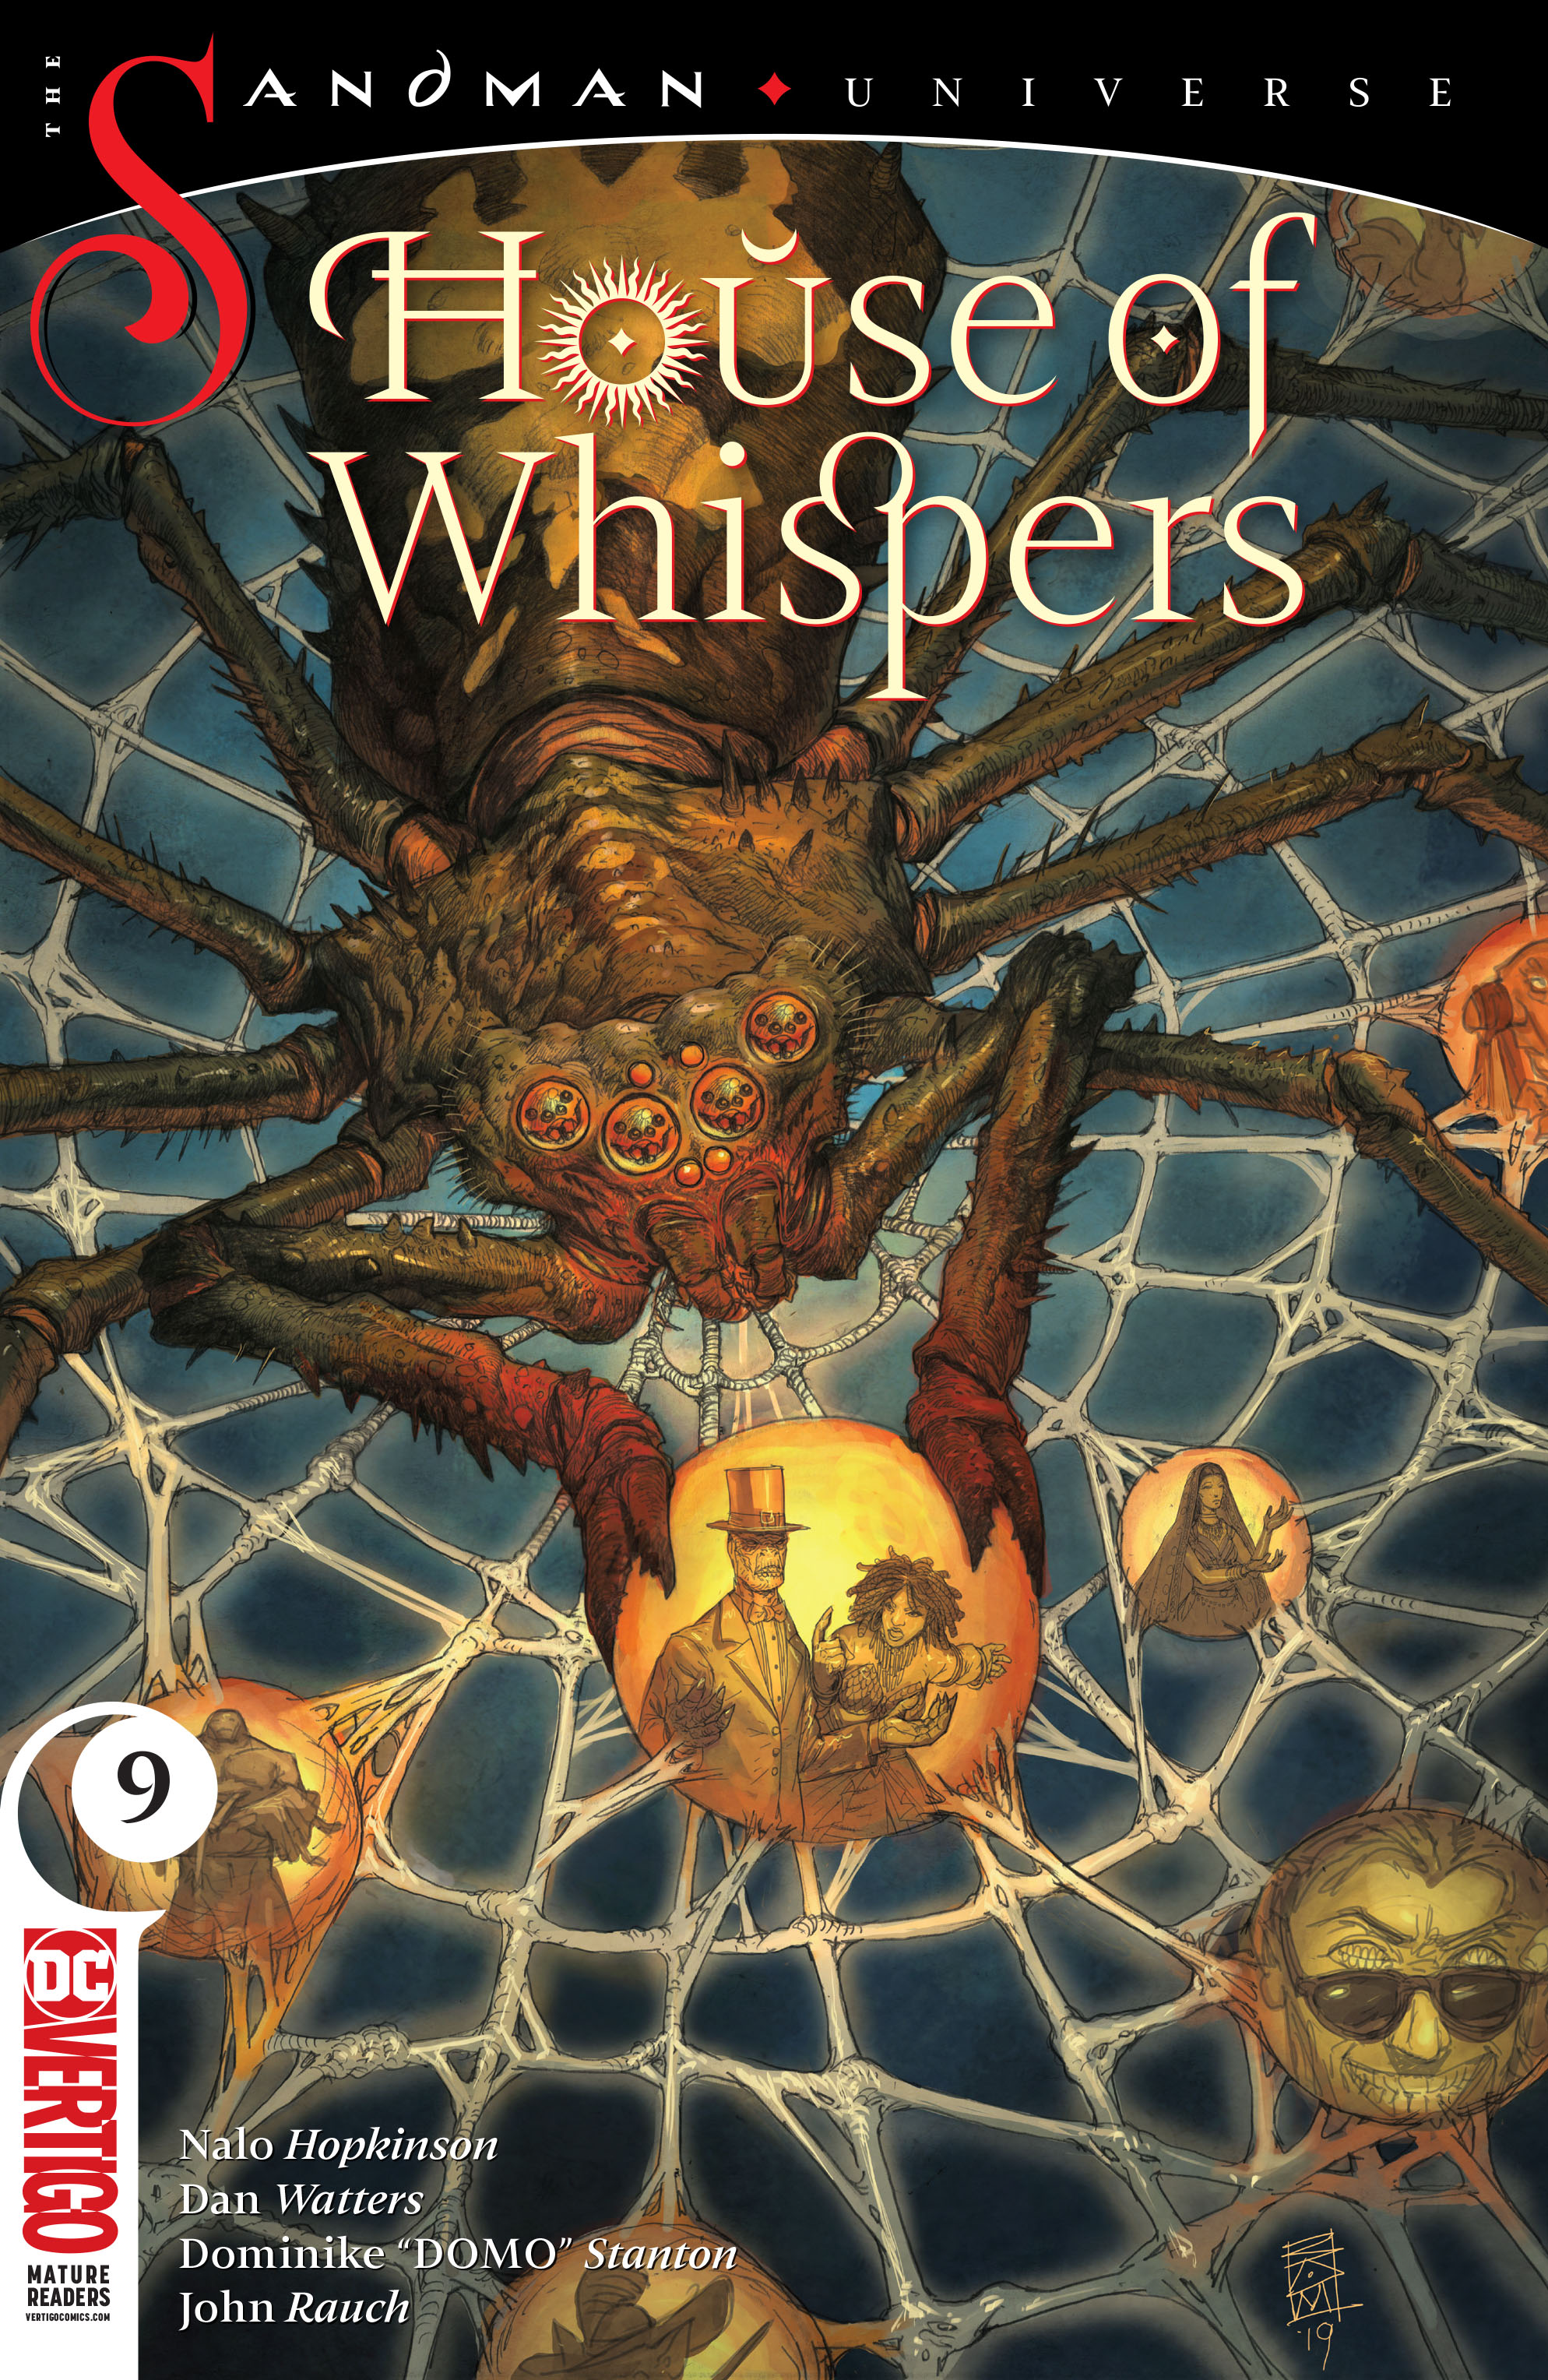 Read online House of Whispers comic -  Issue #9 - 1